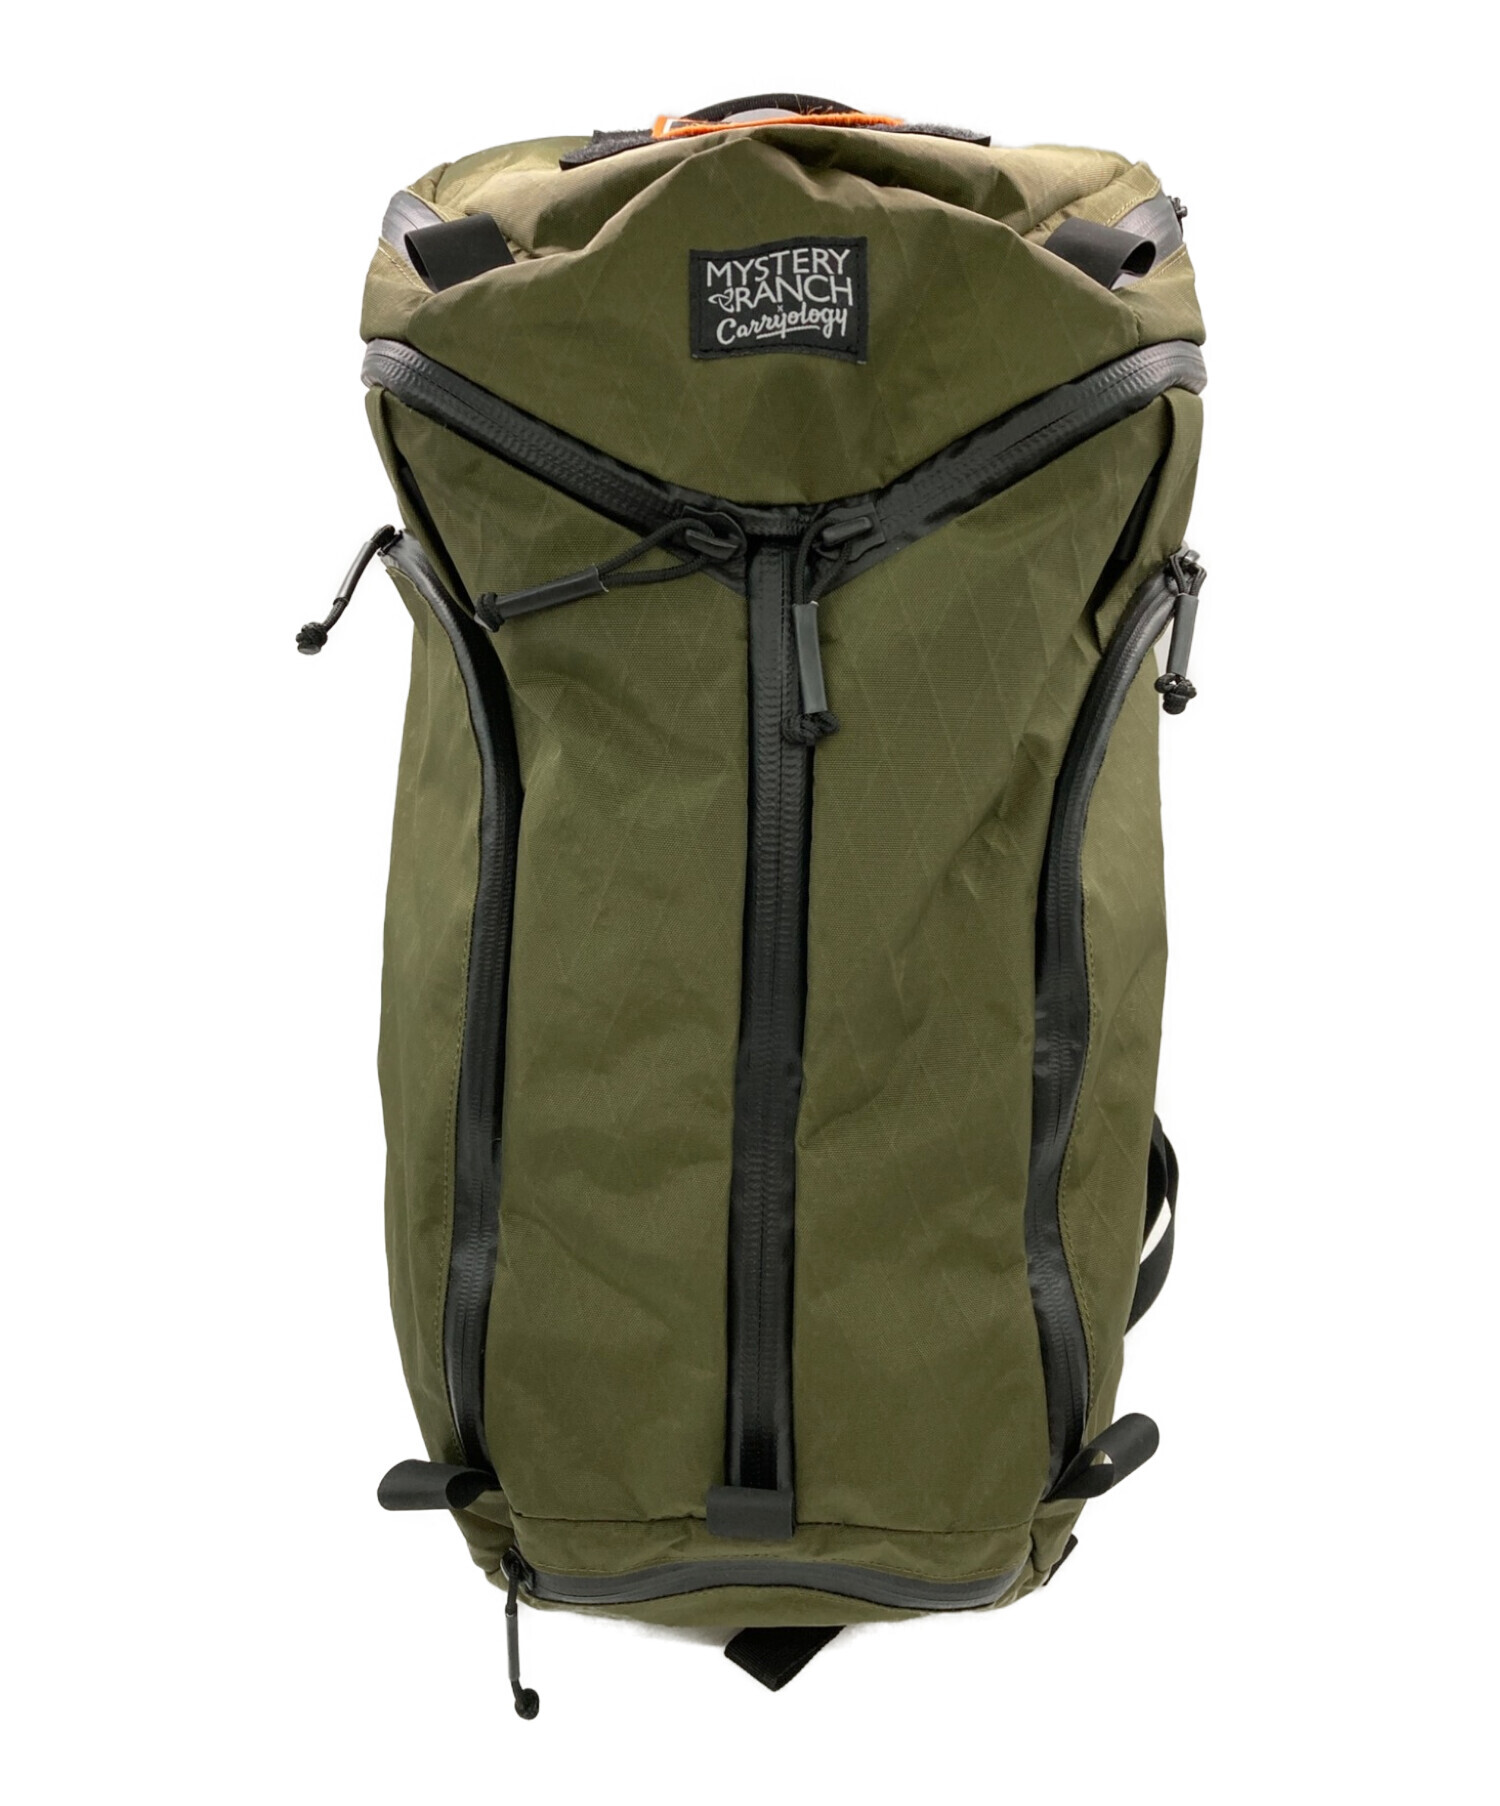 Mystery Ranch x Carryology Spartanology - バッグ